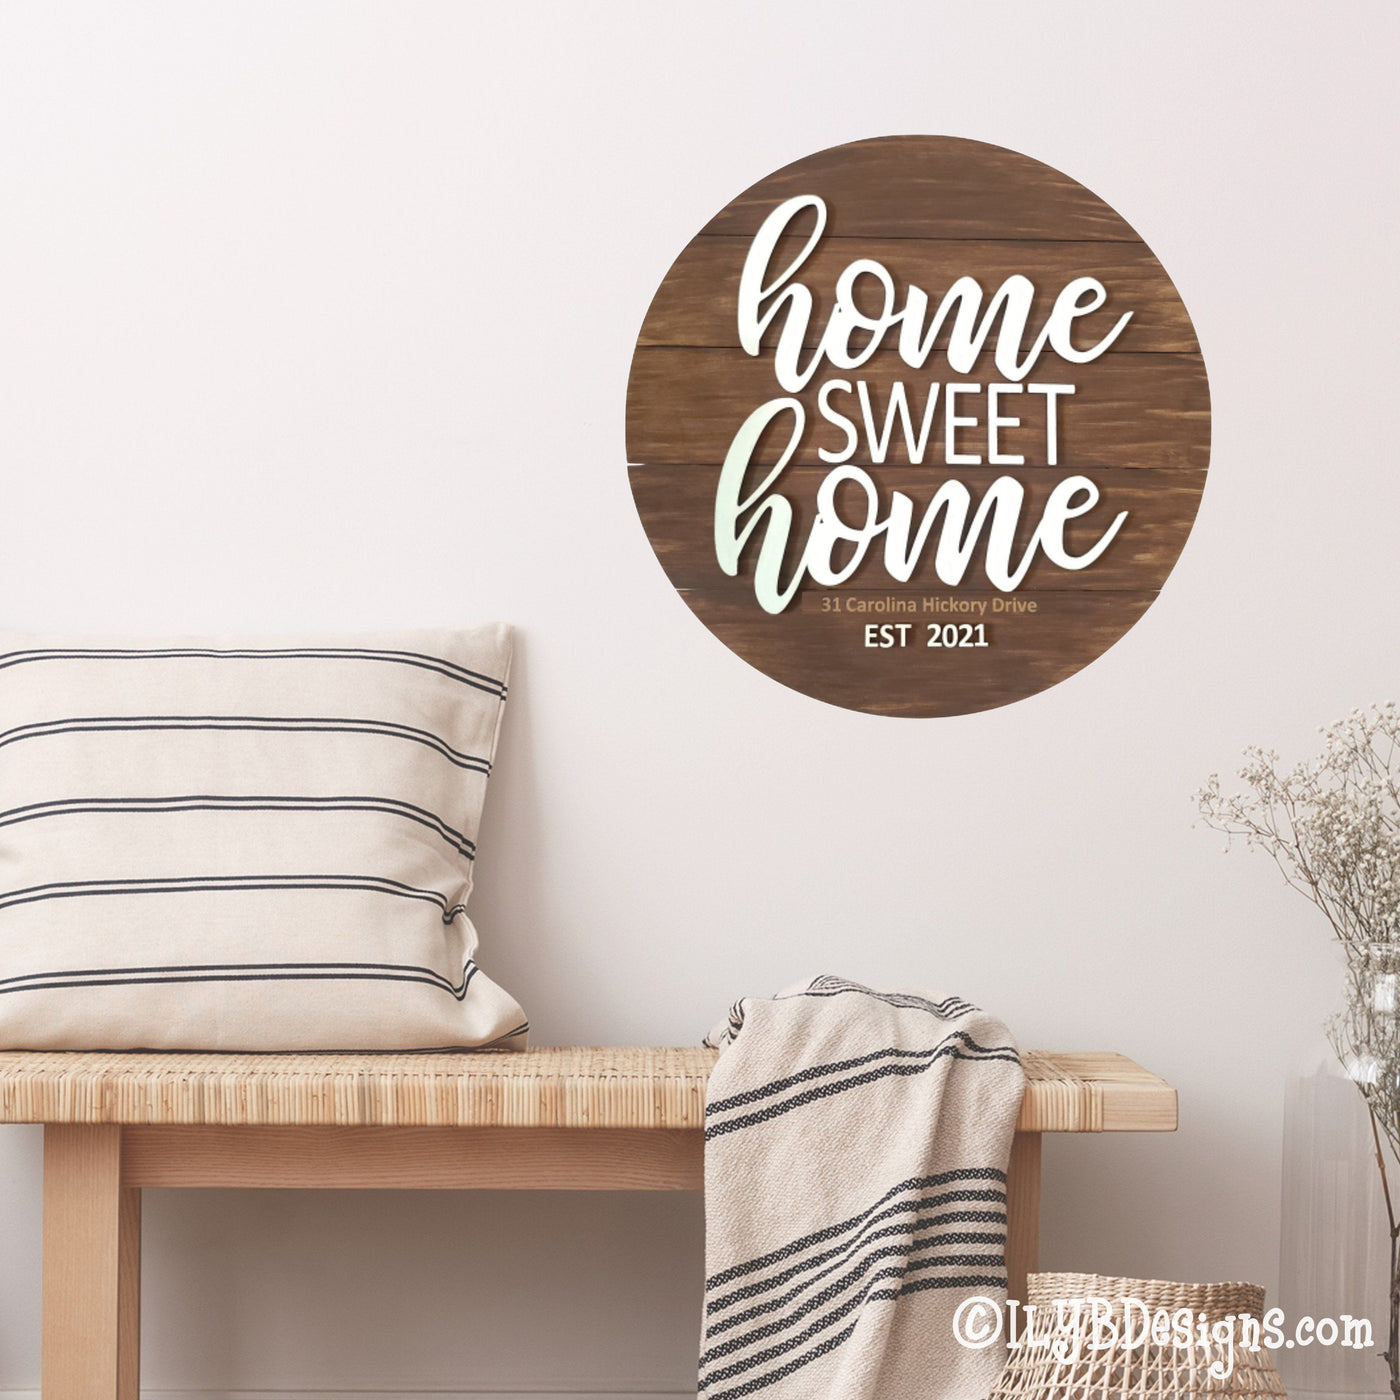 Home Sweet Home Round Shiplap Sign